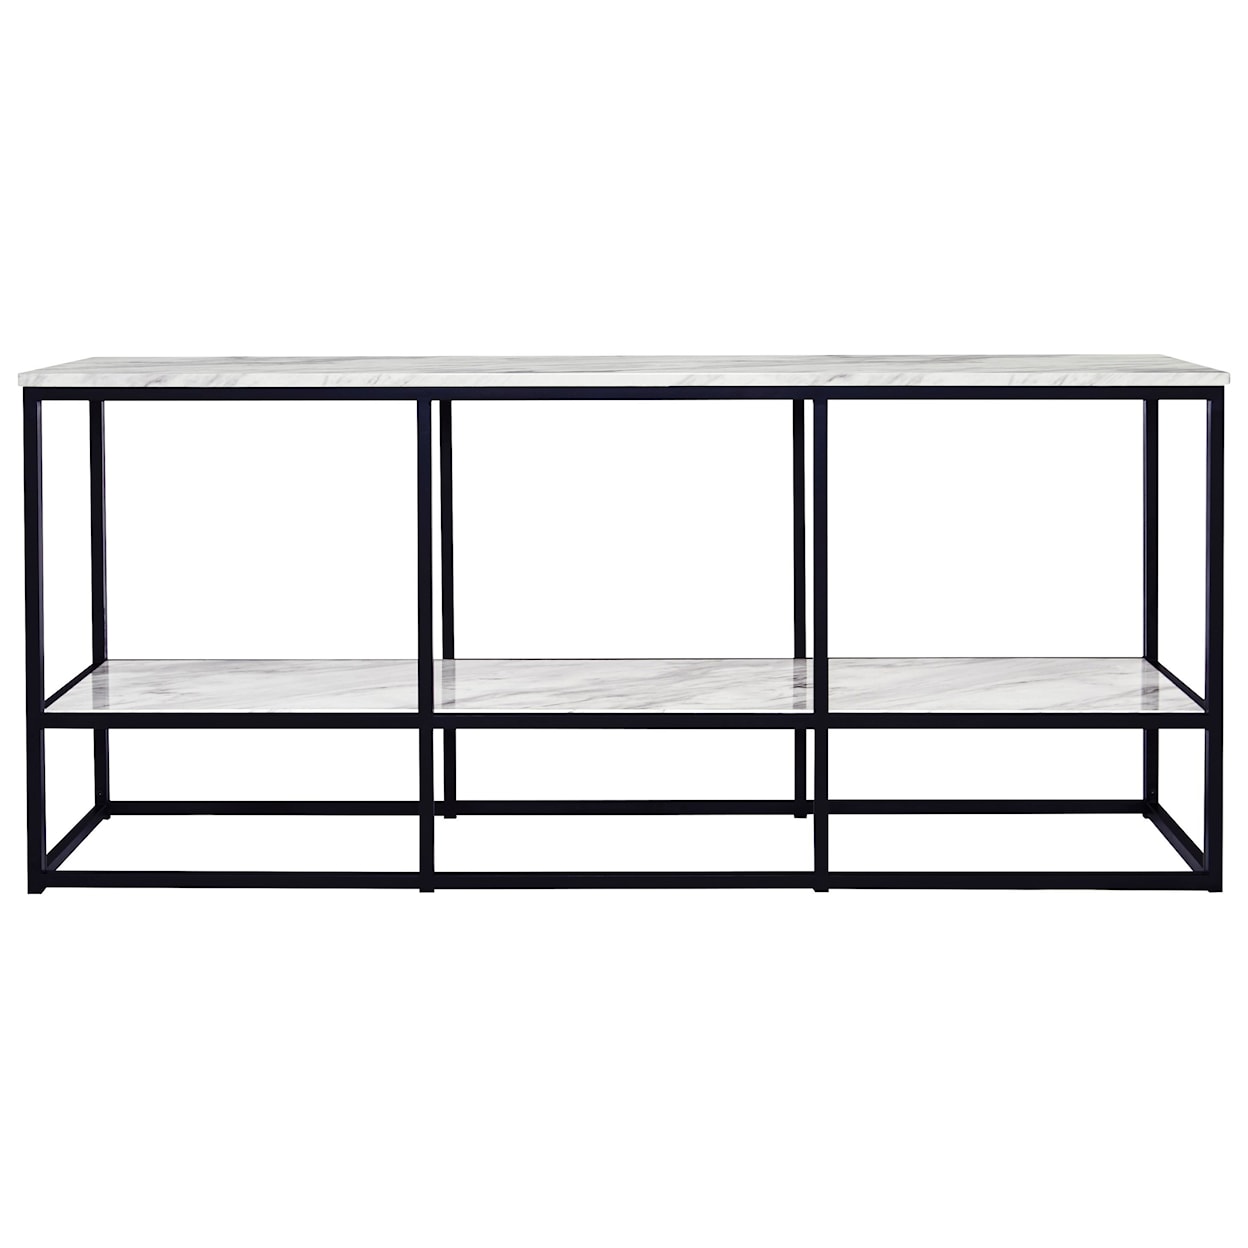 Signature Design by Ashley Donnesta Extra Large TV Stand